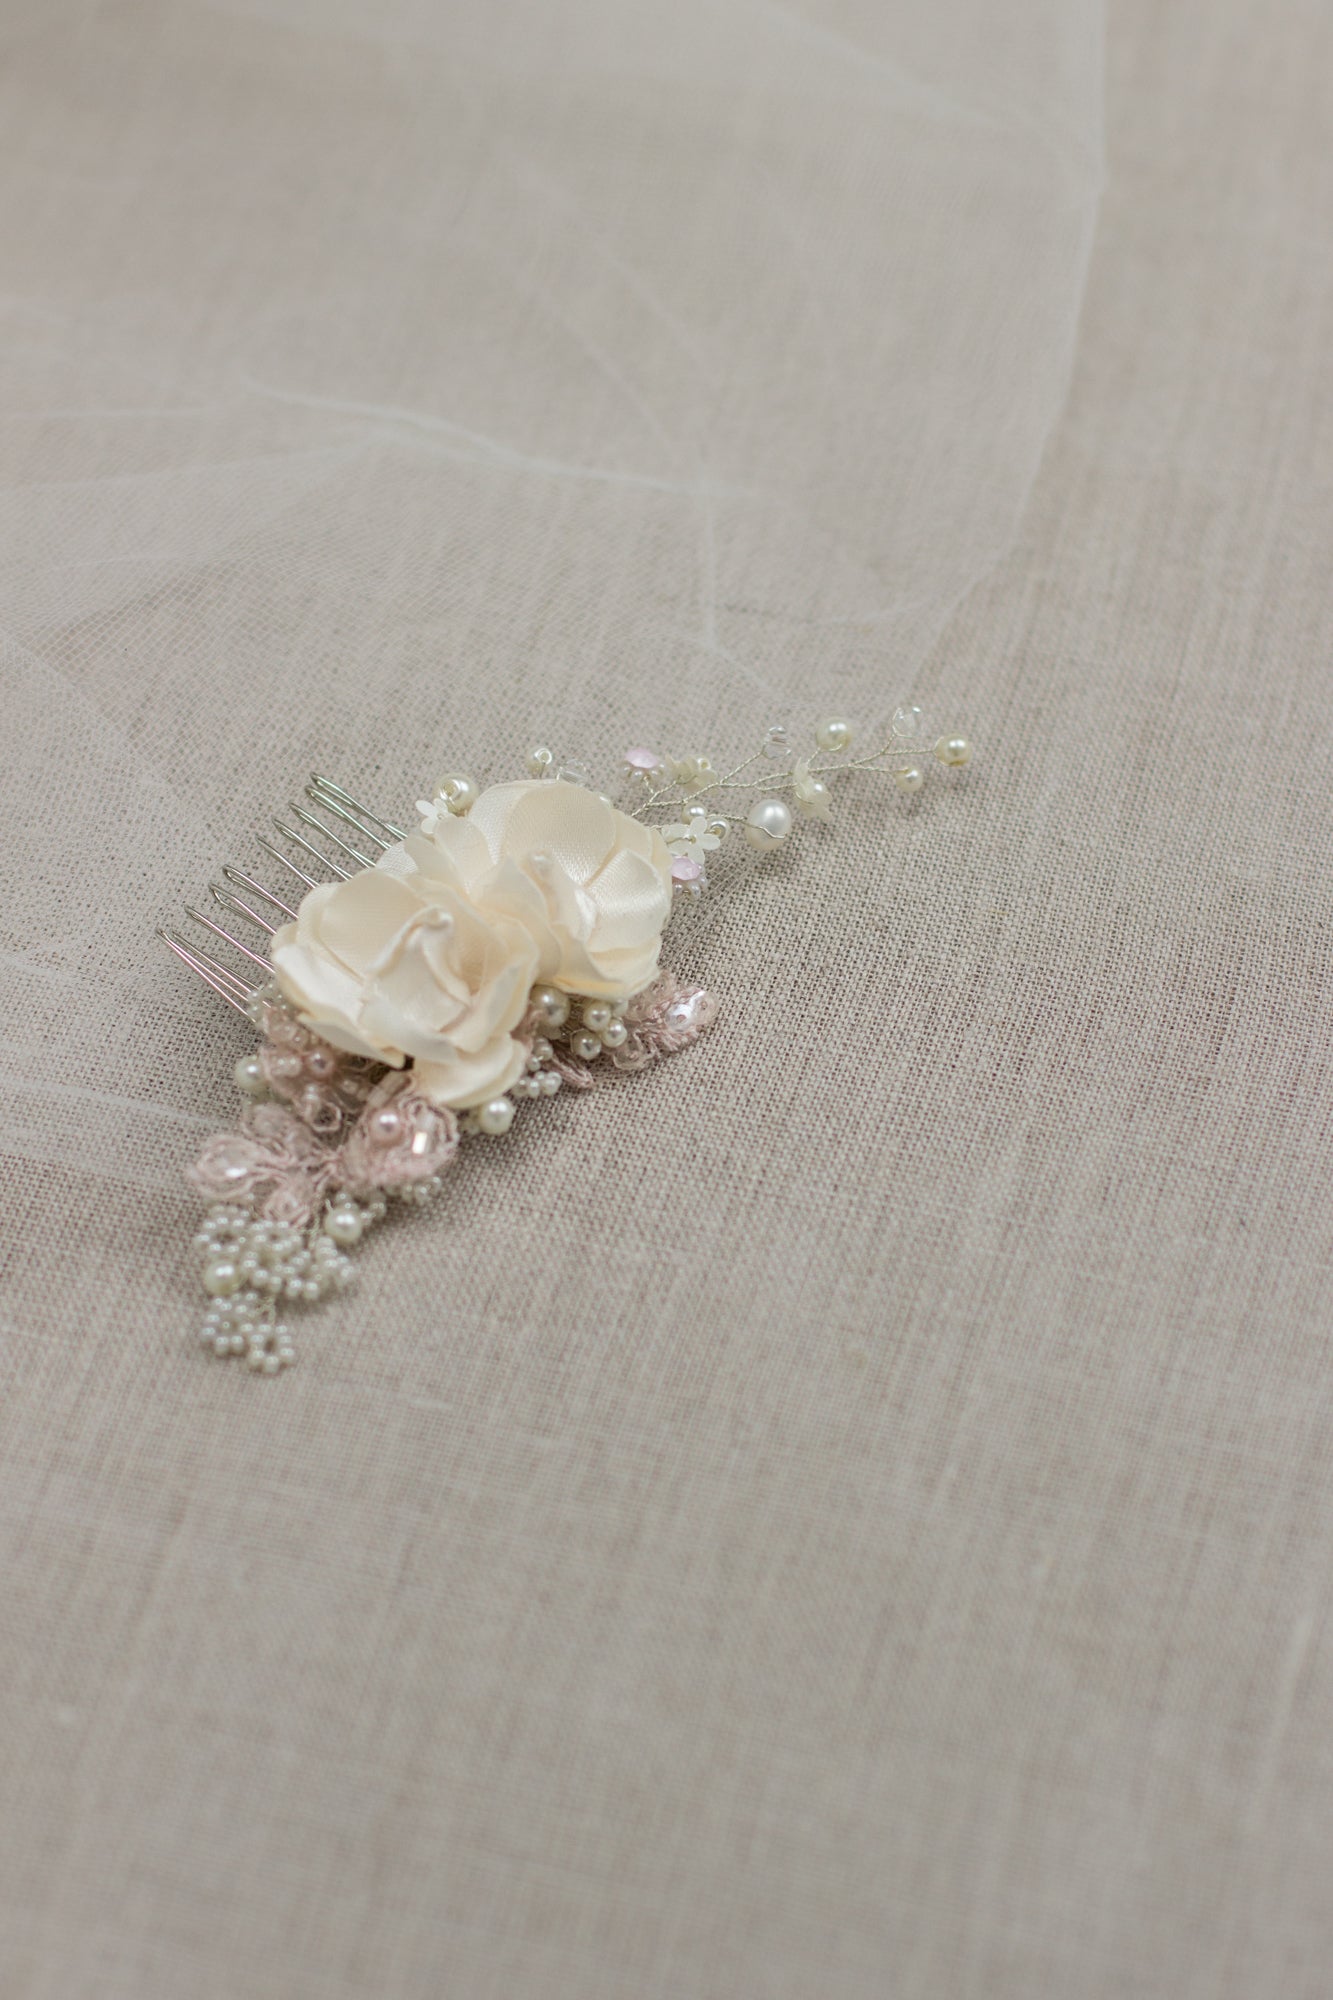  Shop handmade wedding hair accessories at online bridal boutique in Europe. One of a kind bridal hair comb. Floral lace wedding headpiece. Flower hair comb. Wedding hair piece features flowers and twigs. Hair adornment.